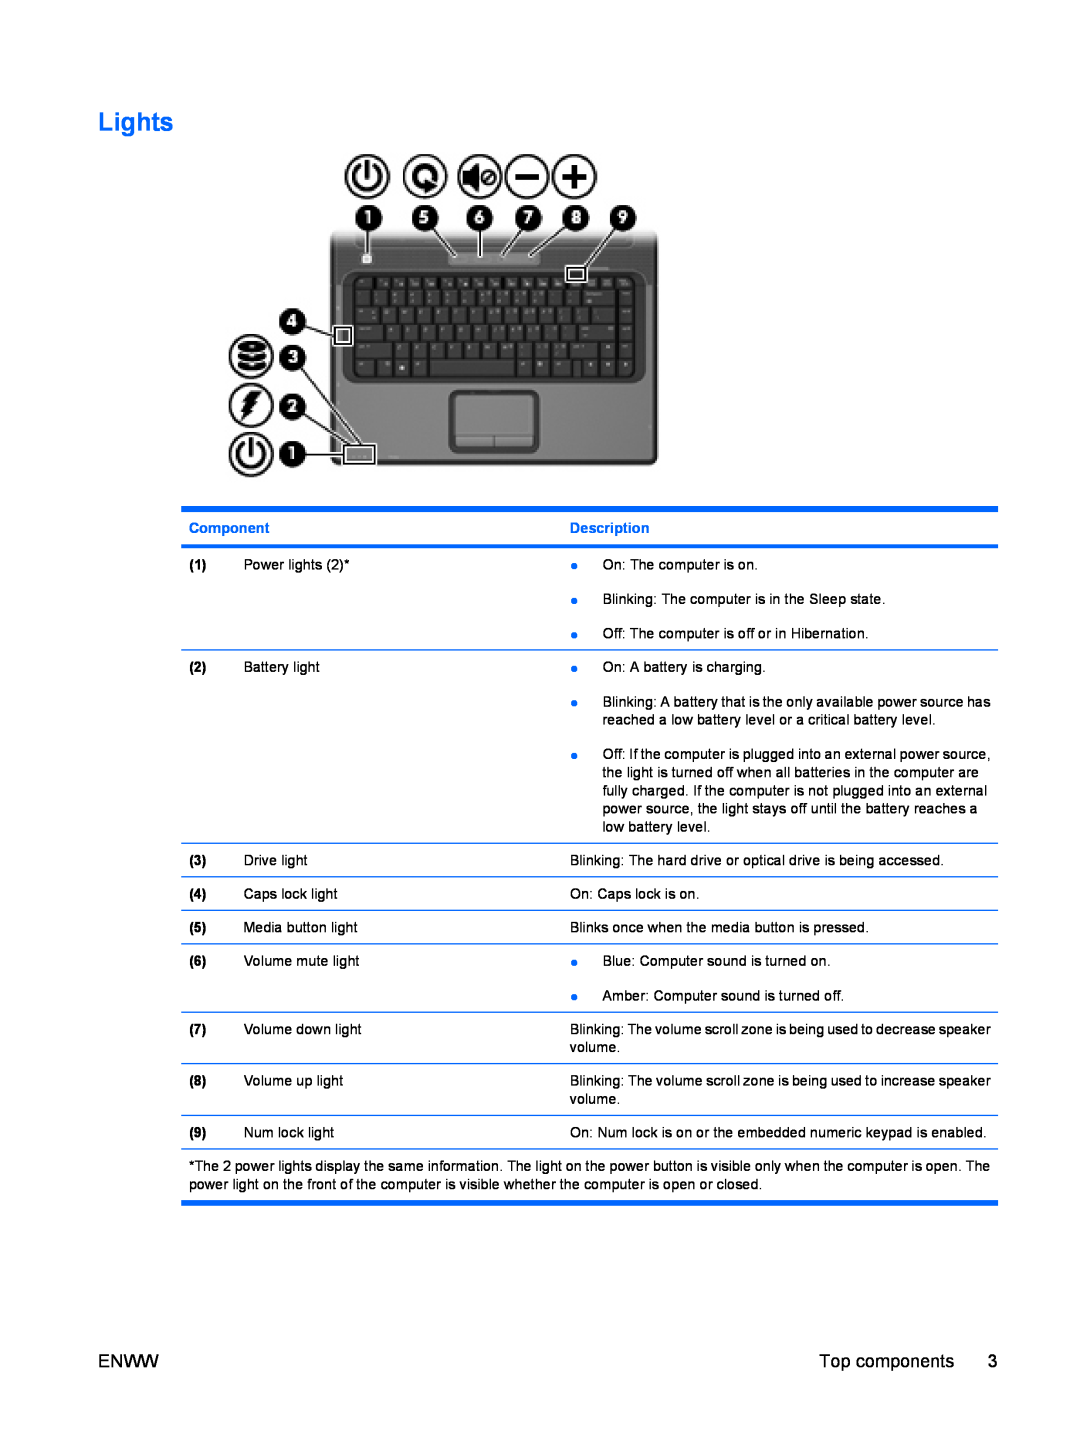 HP V6700TX, V6903TU manual Lights, Component, Description, Blinking The volume scroll zone is being used to decrease speaker 